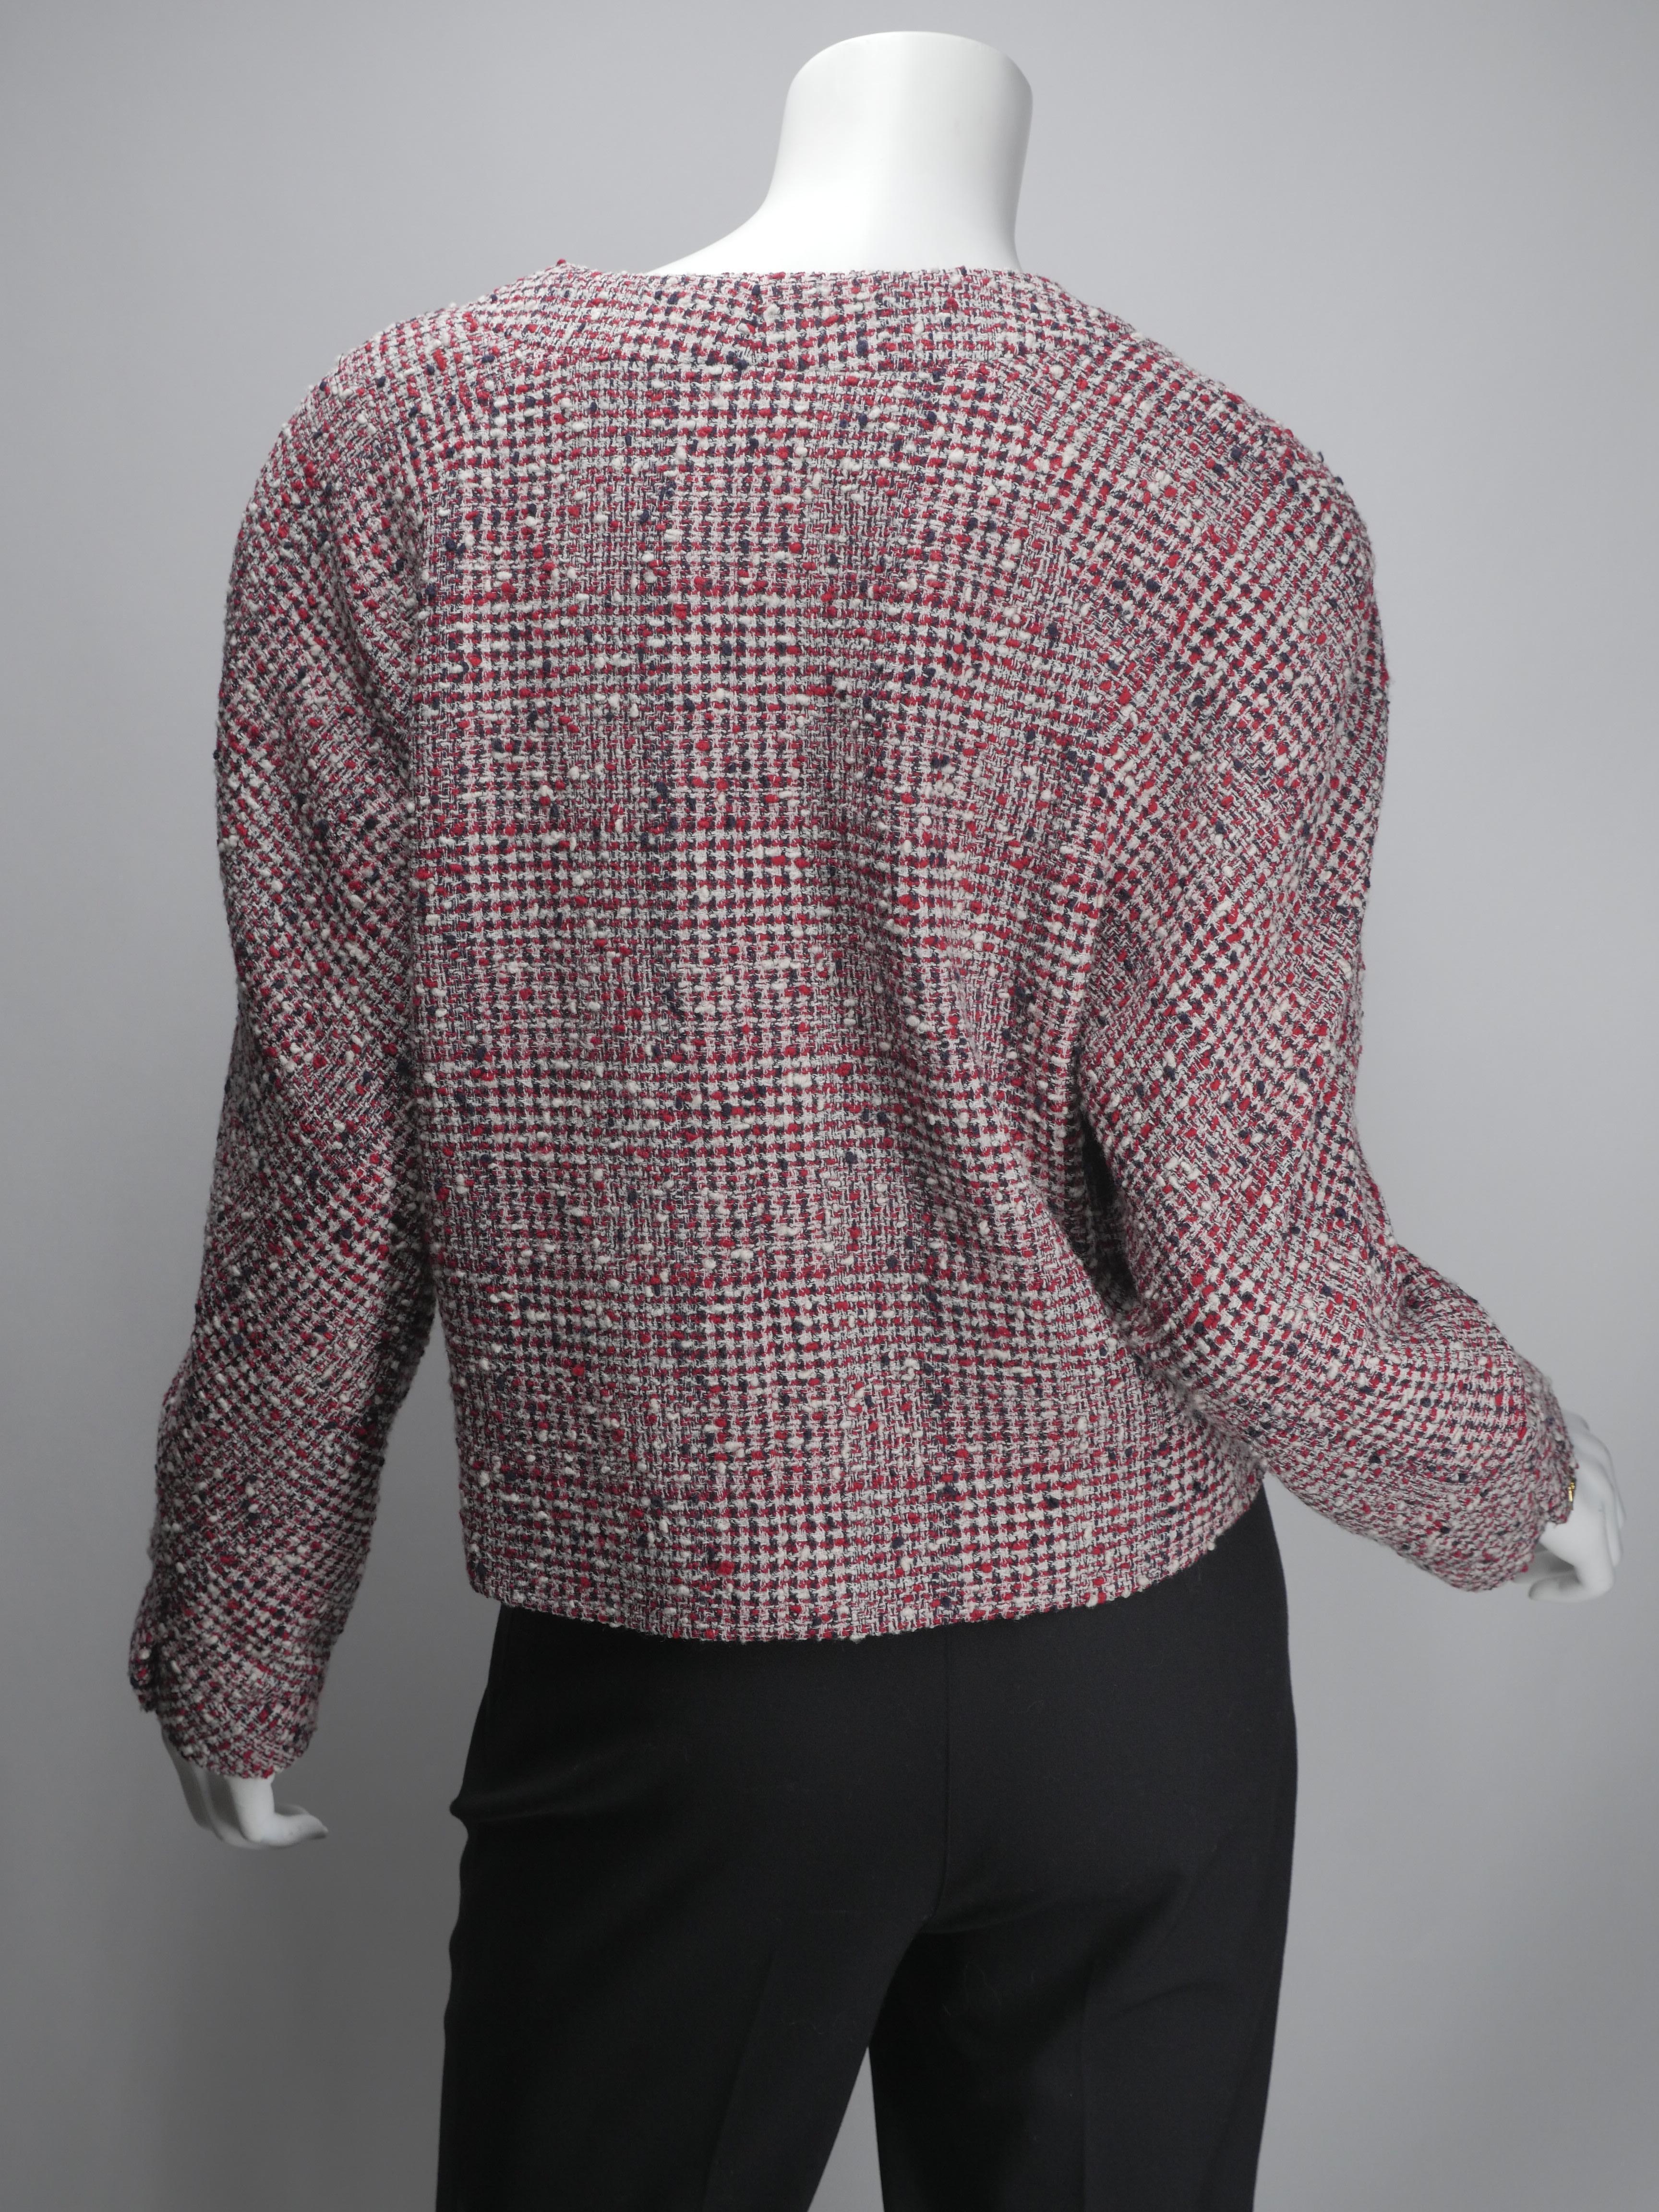 Chanel Women's Double-Breasted Tweed Cropped Jacket  4